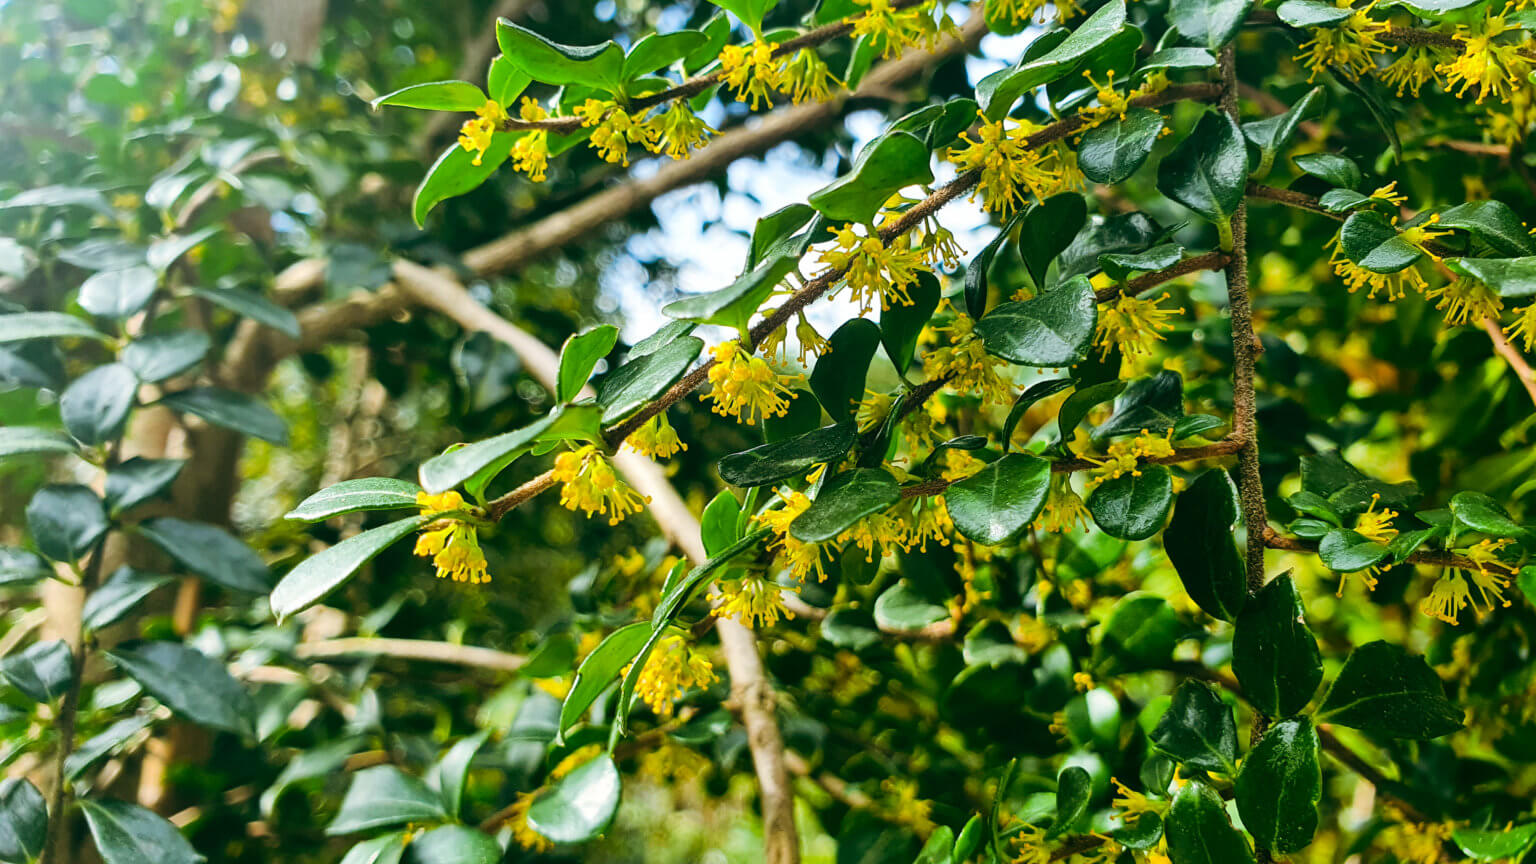 AZARA microphylla – Scented Vanilla or Chocolate Tree 🍫 – 30th August 2021